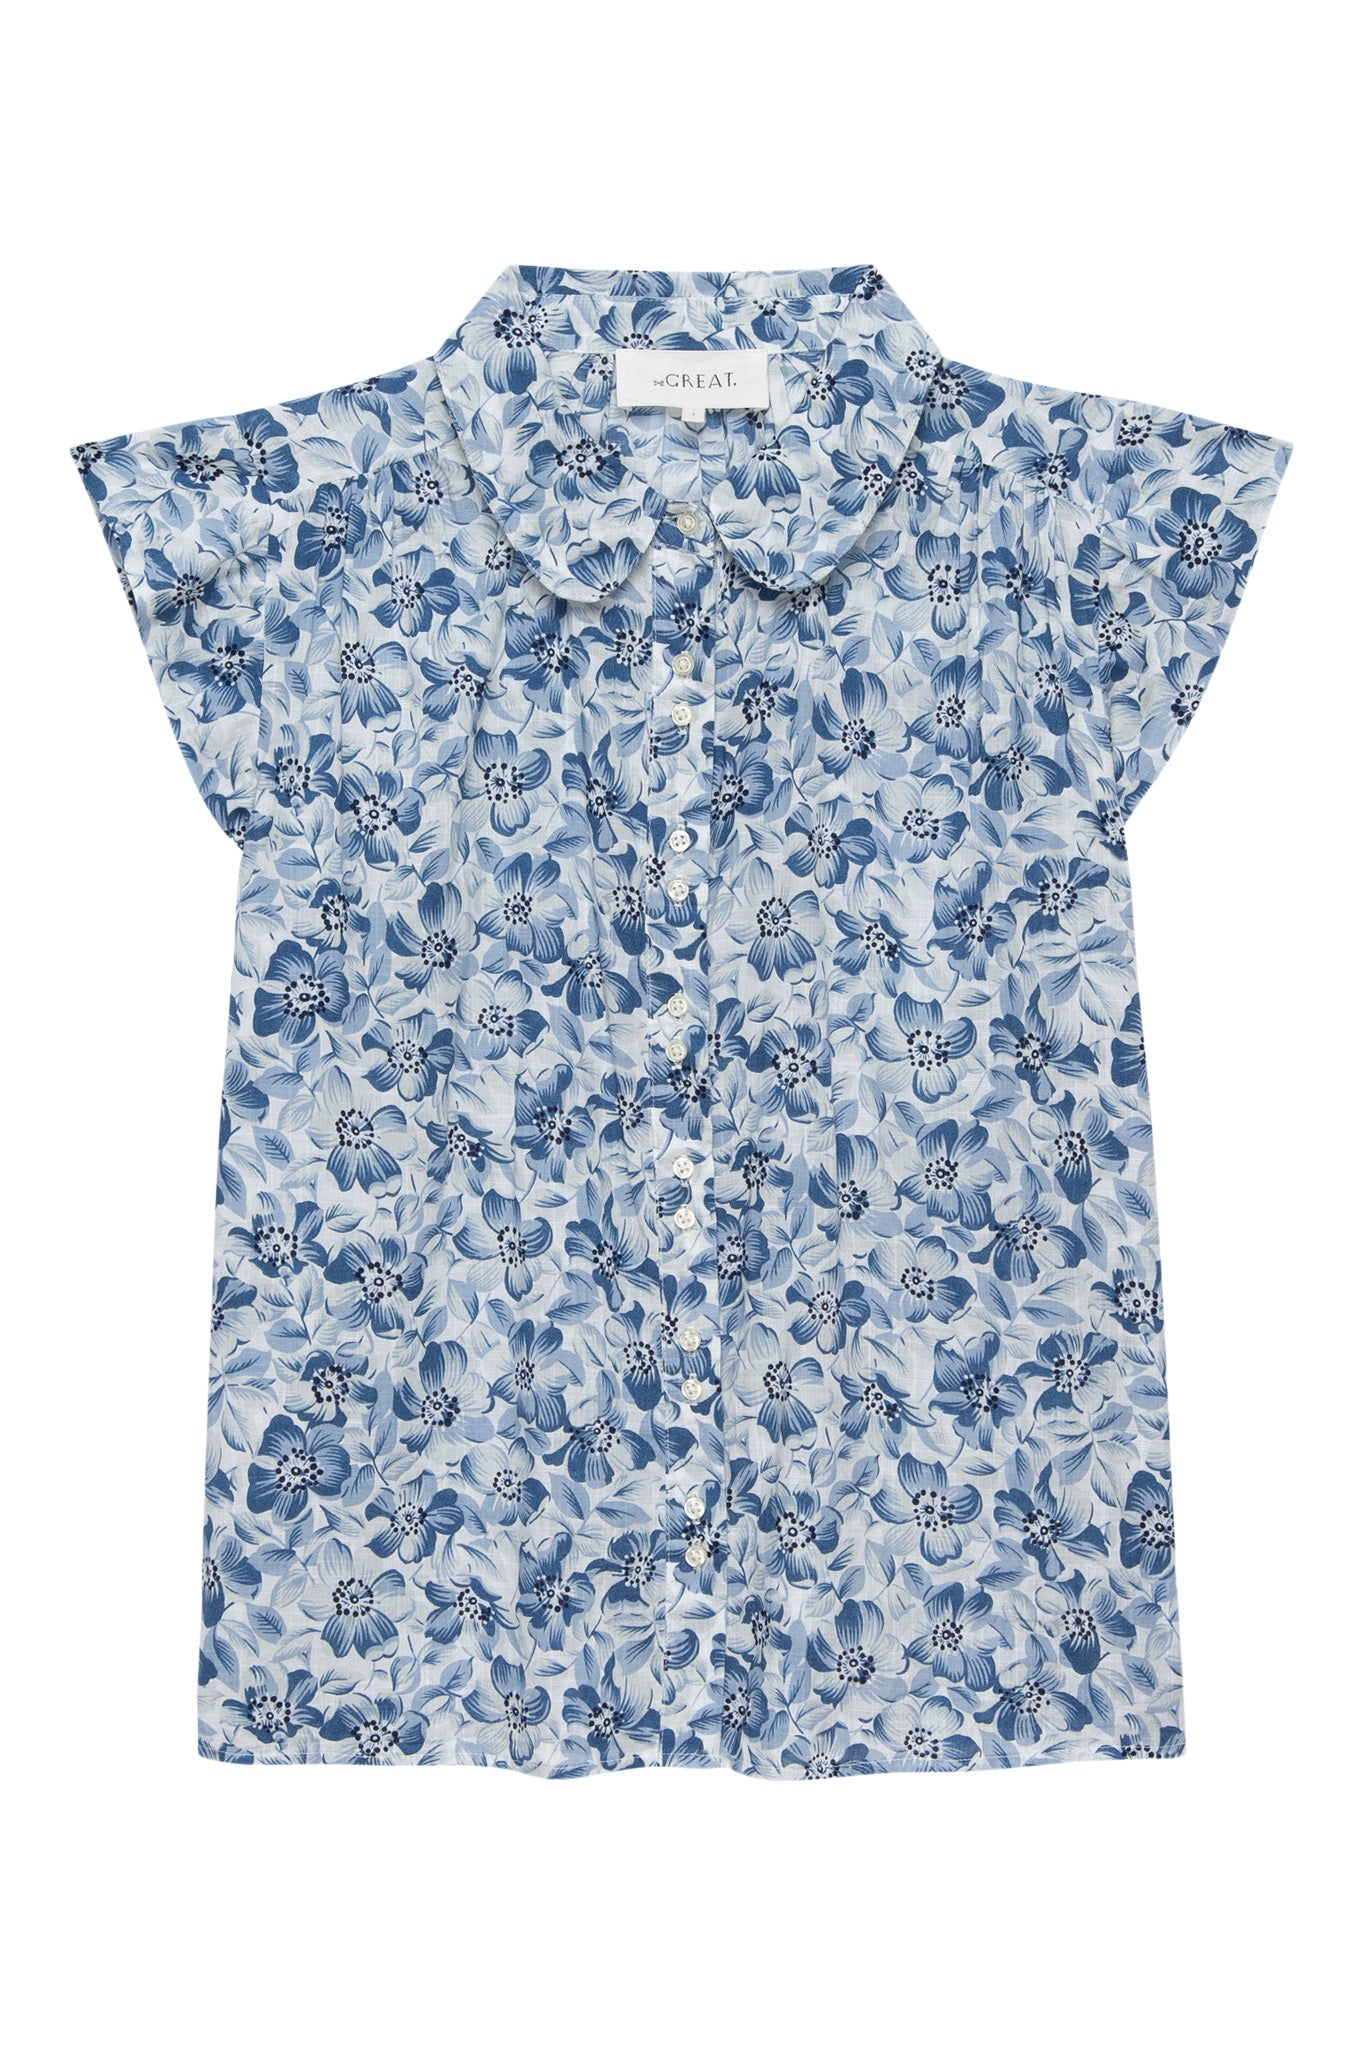 The Great Wren Top in Light Sky Pressed Floral Print